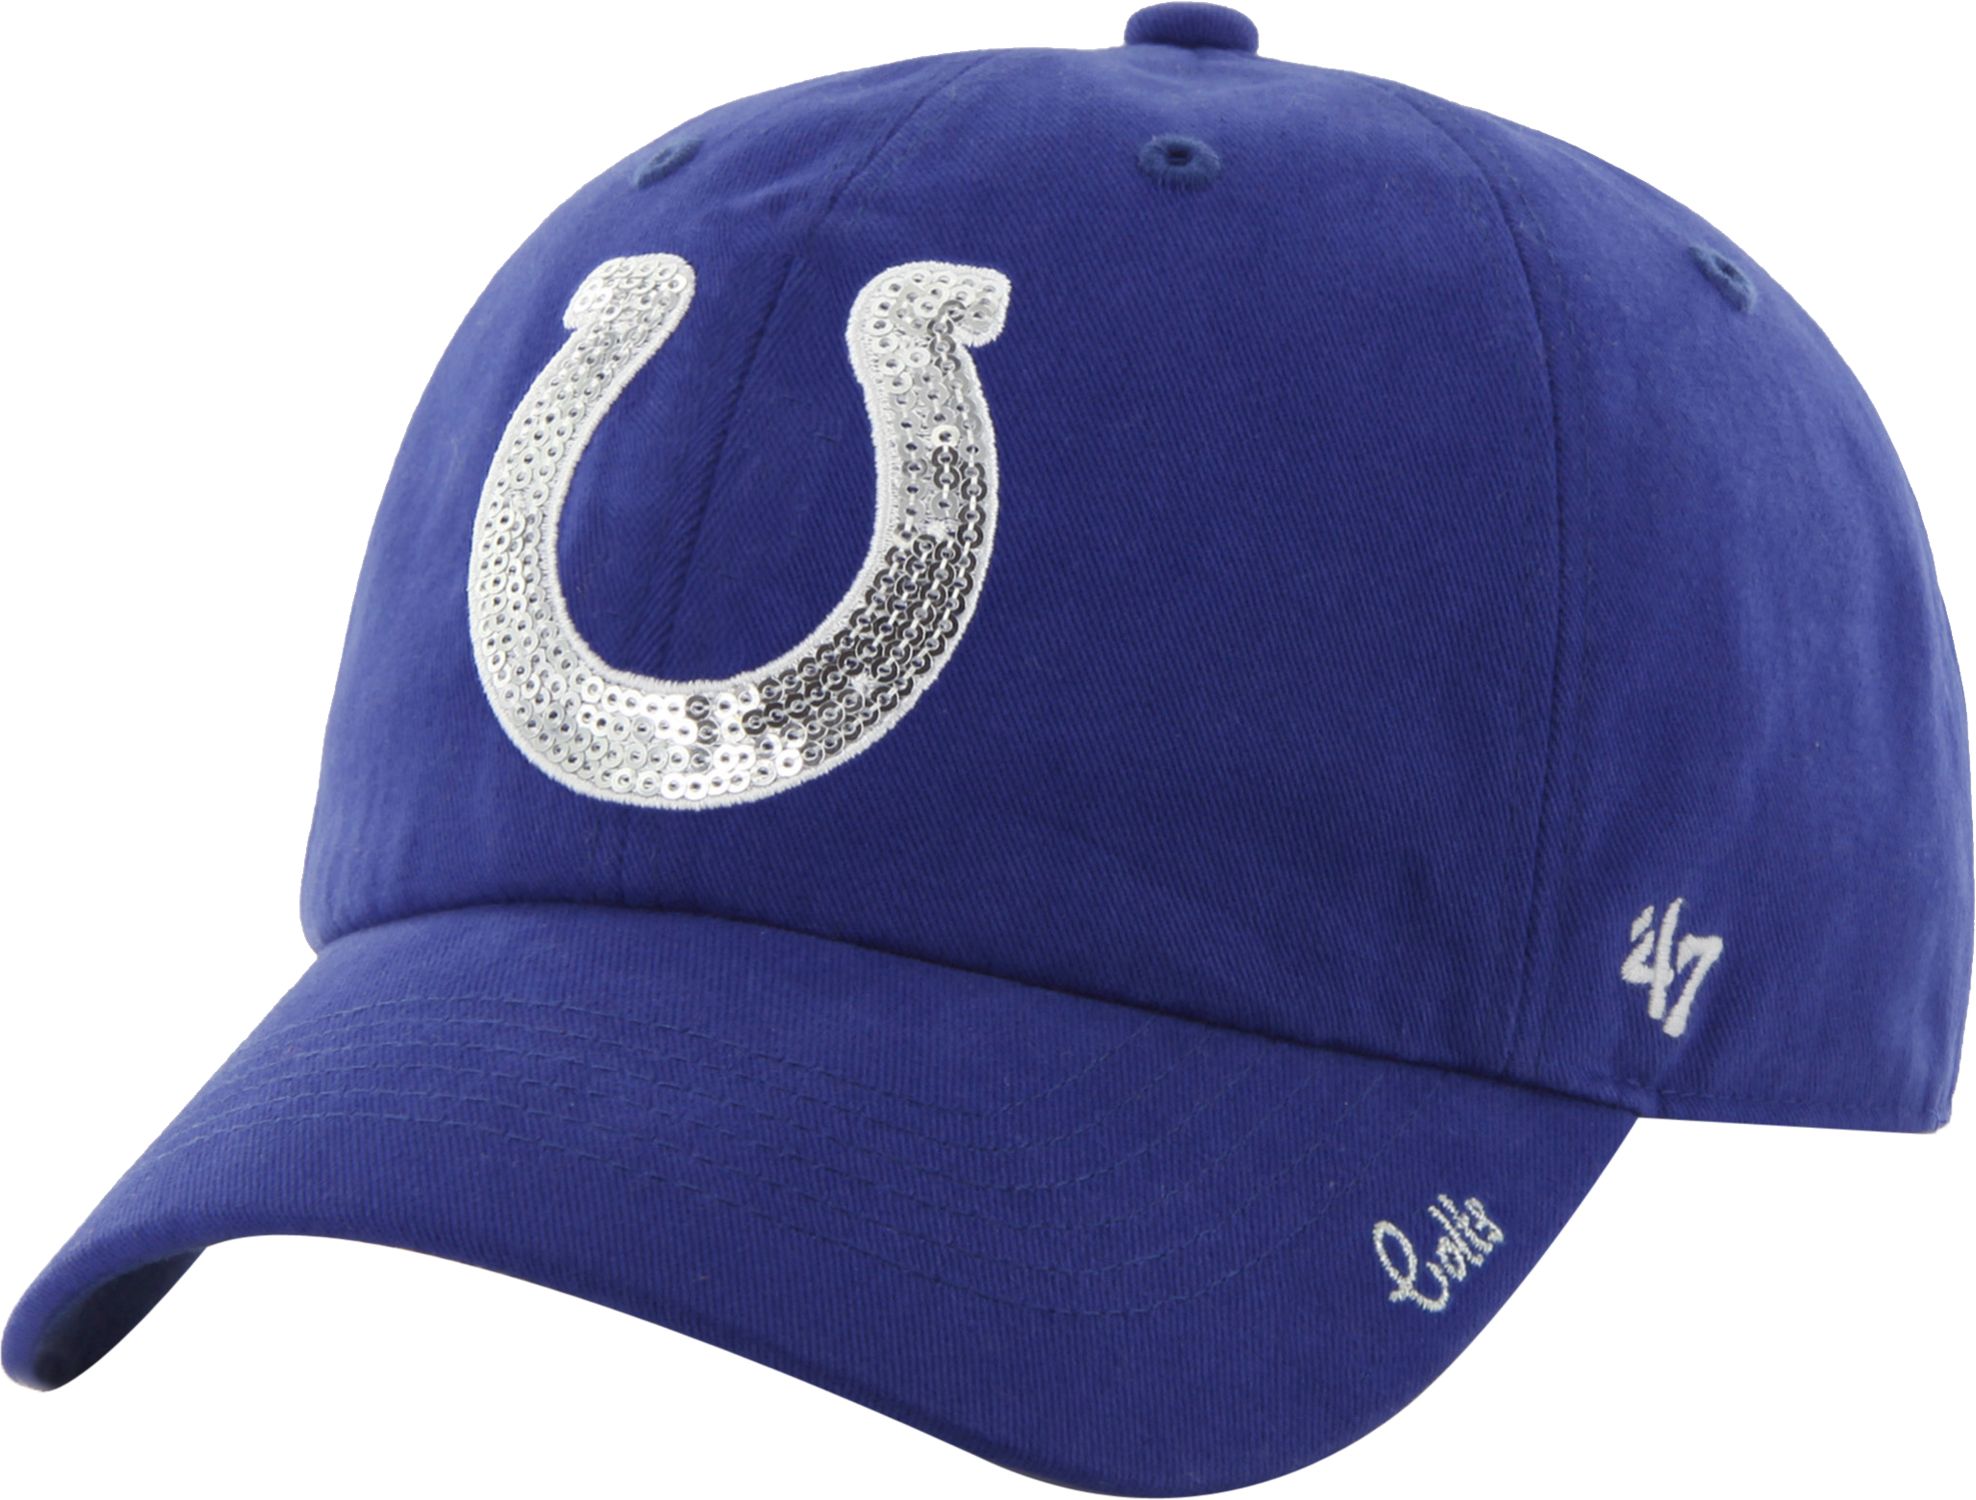 Indianapolis Colts Hats | Curbside 